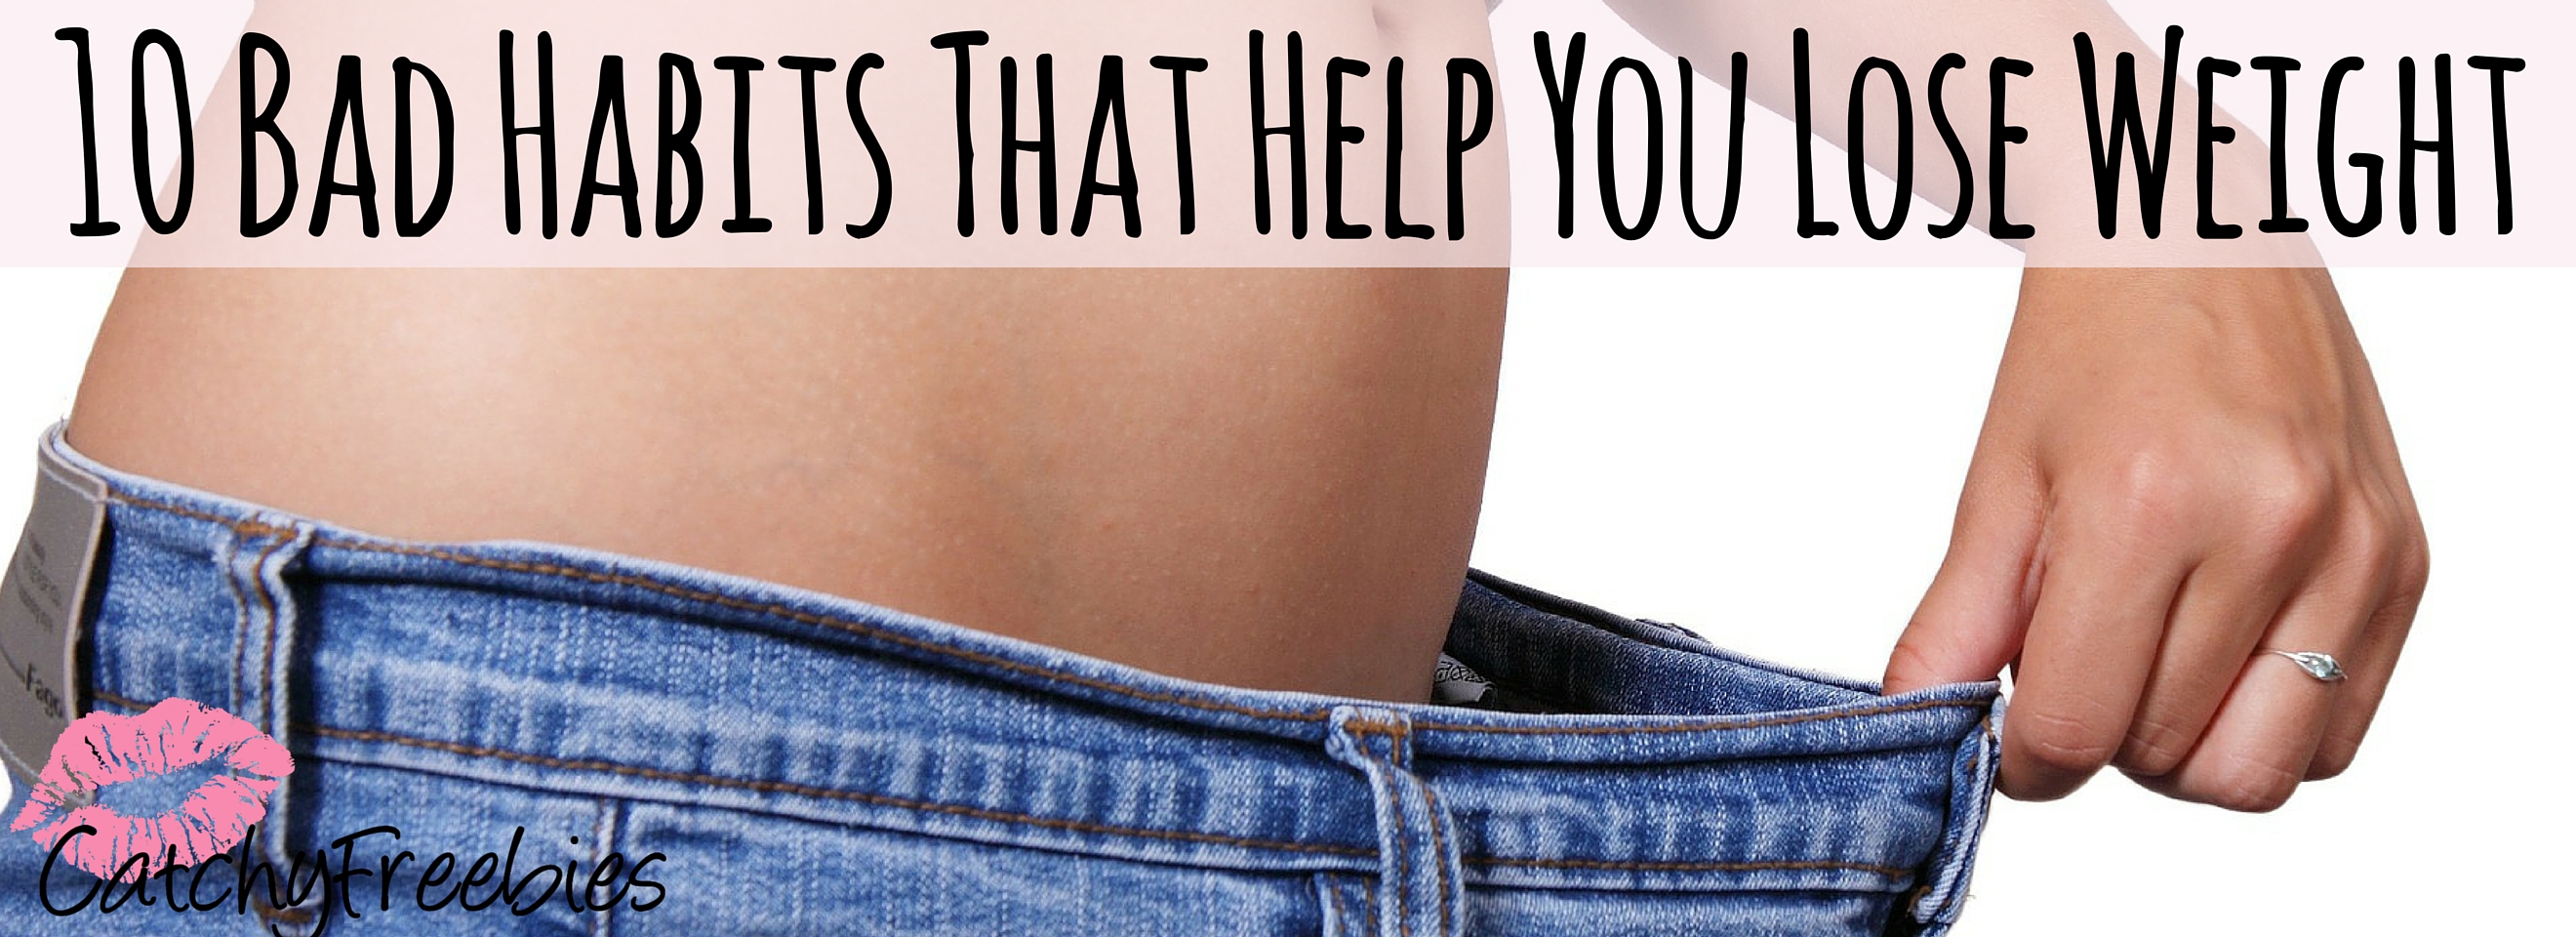 10 Bad Habits That Help You Lose Weight -CatchyFreebies